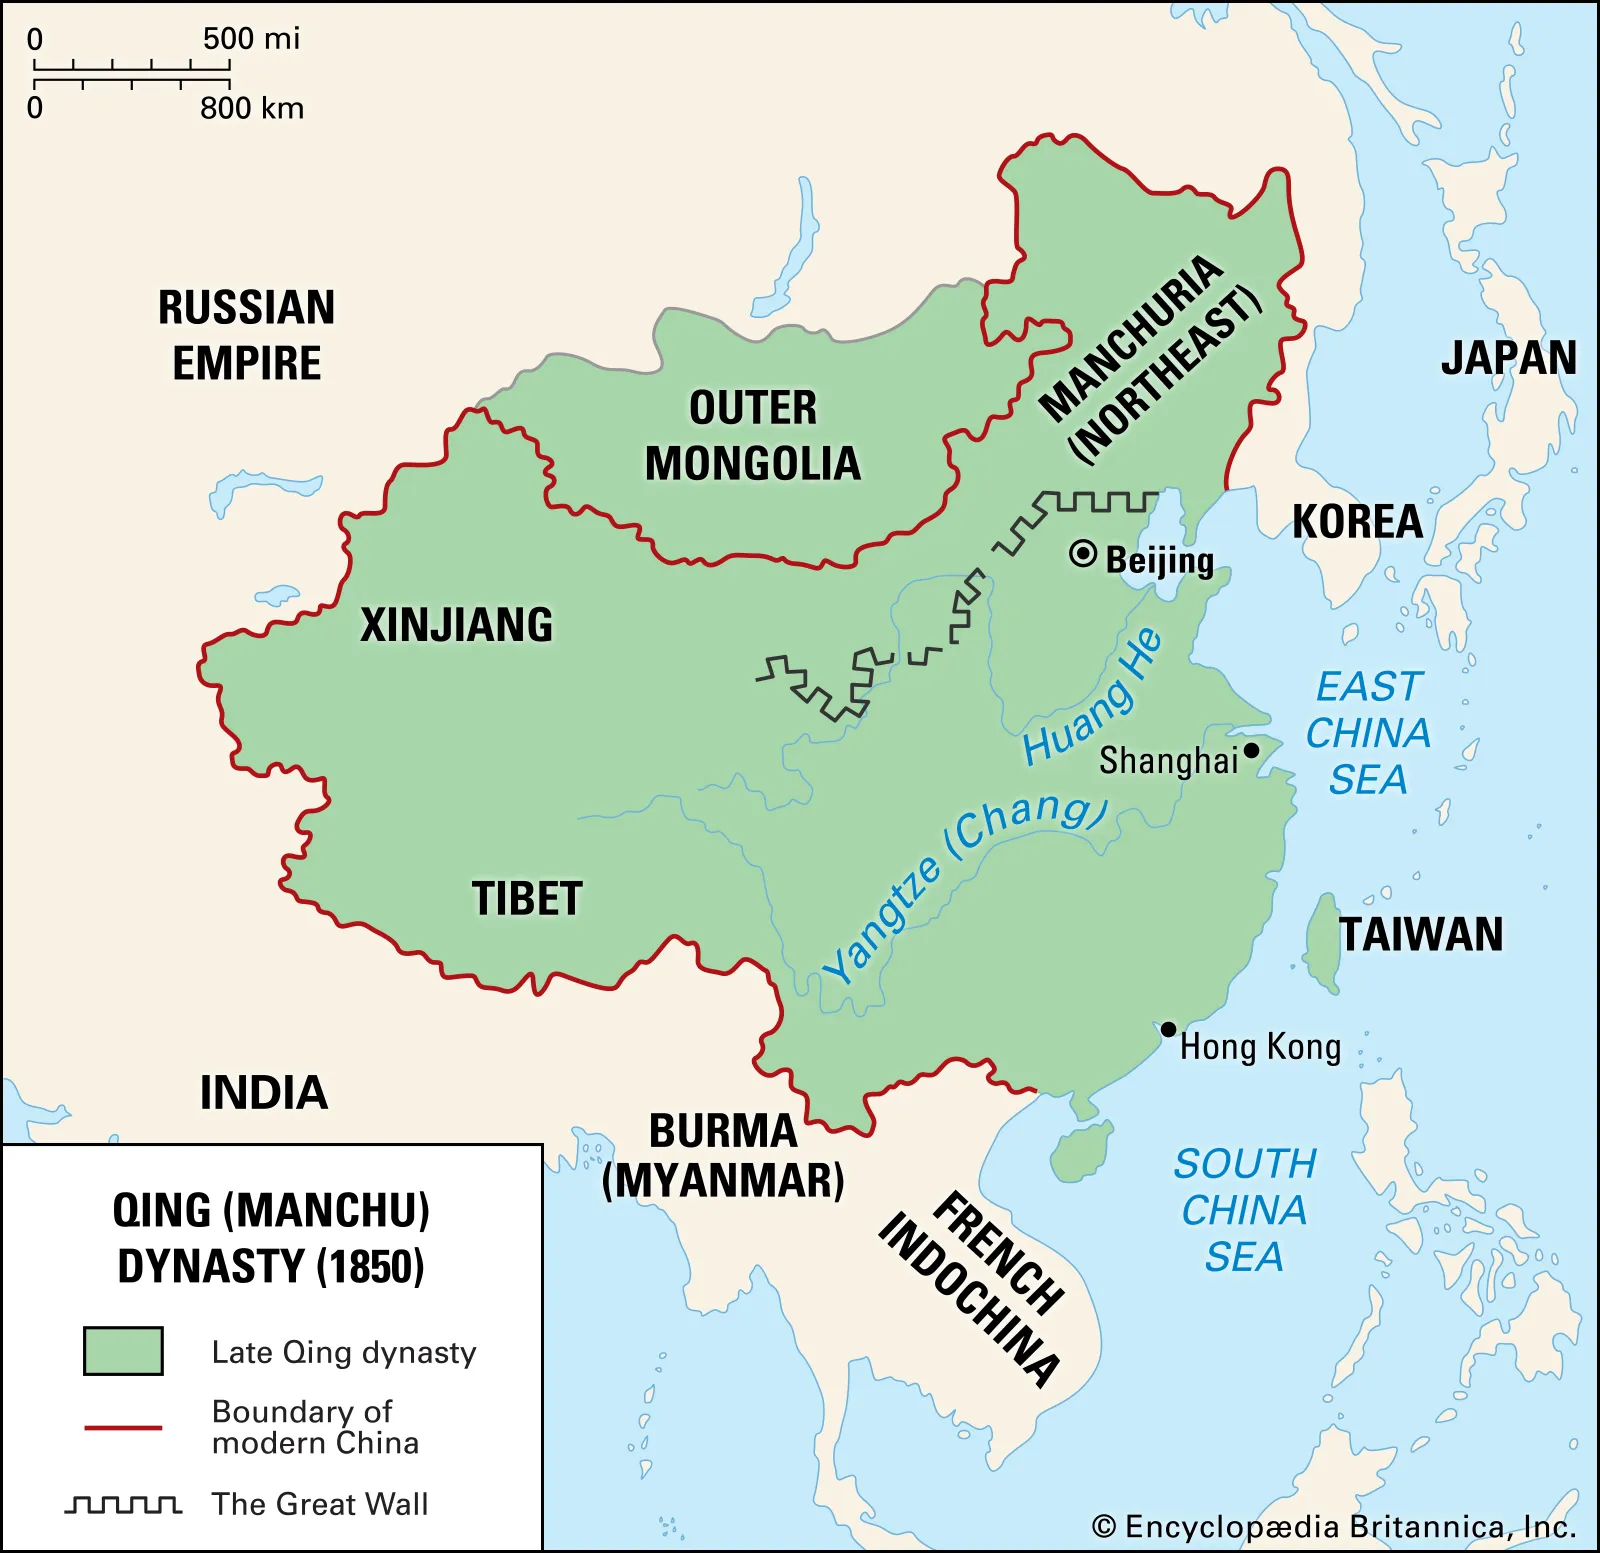 <p>__________- Final imperial in China lasting from 1644 to 1912.</p>